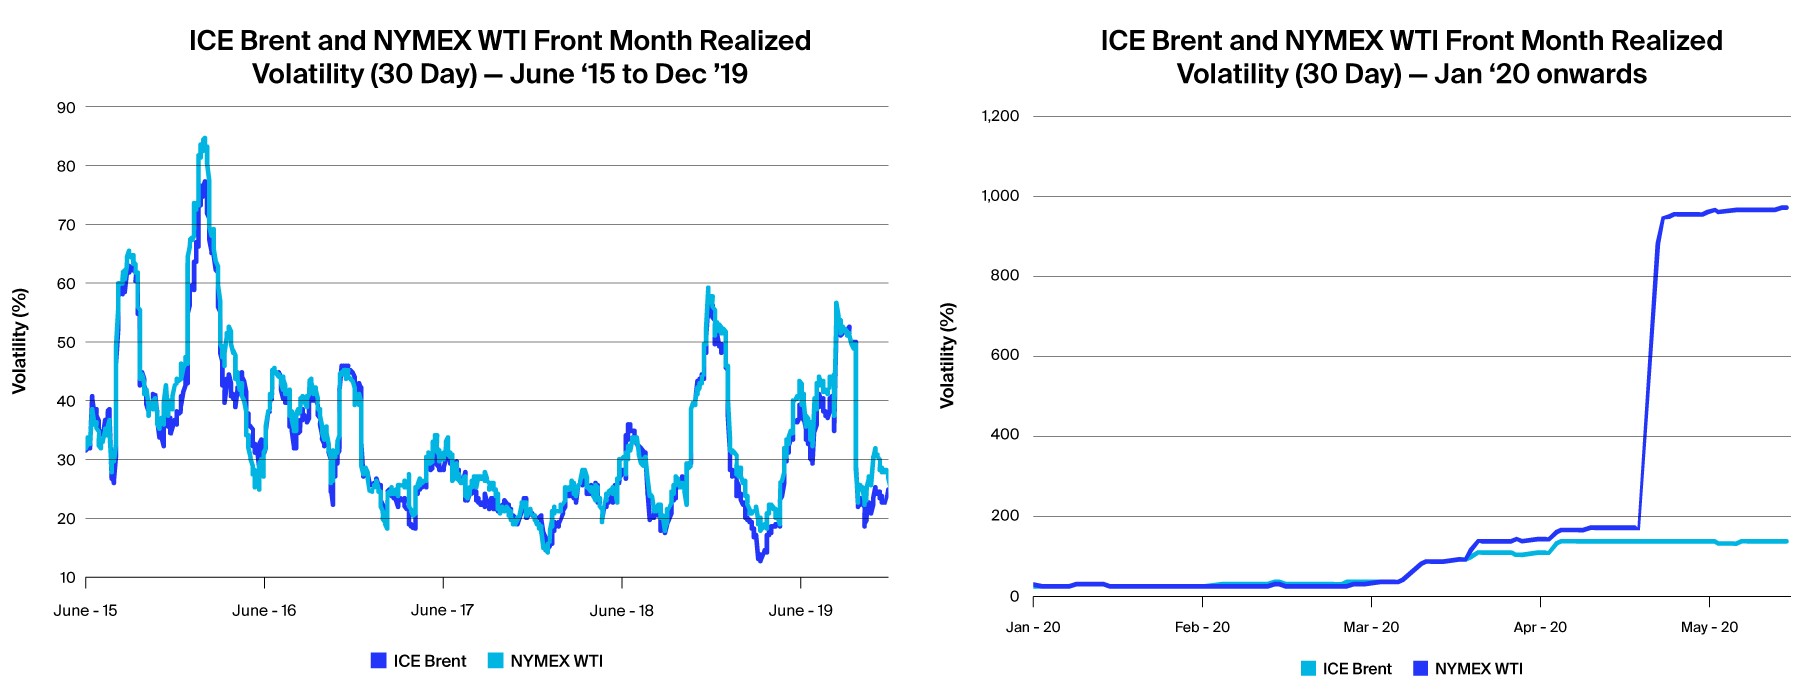 2 charts: left, ICE Brent and NYMEX WTI Front Month Volatility (30 Day) - June '15 to Dec '19; right, ICE Brent and NYMEX WTI Front Month Realized Volatility (30 Day) - Jan '20 onwards